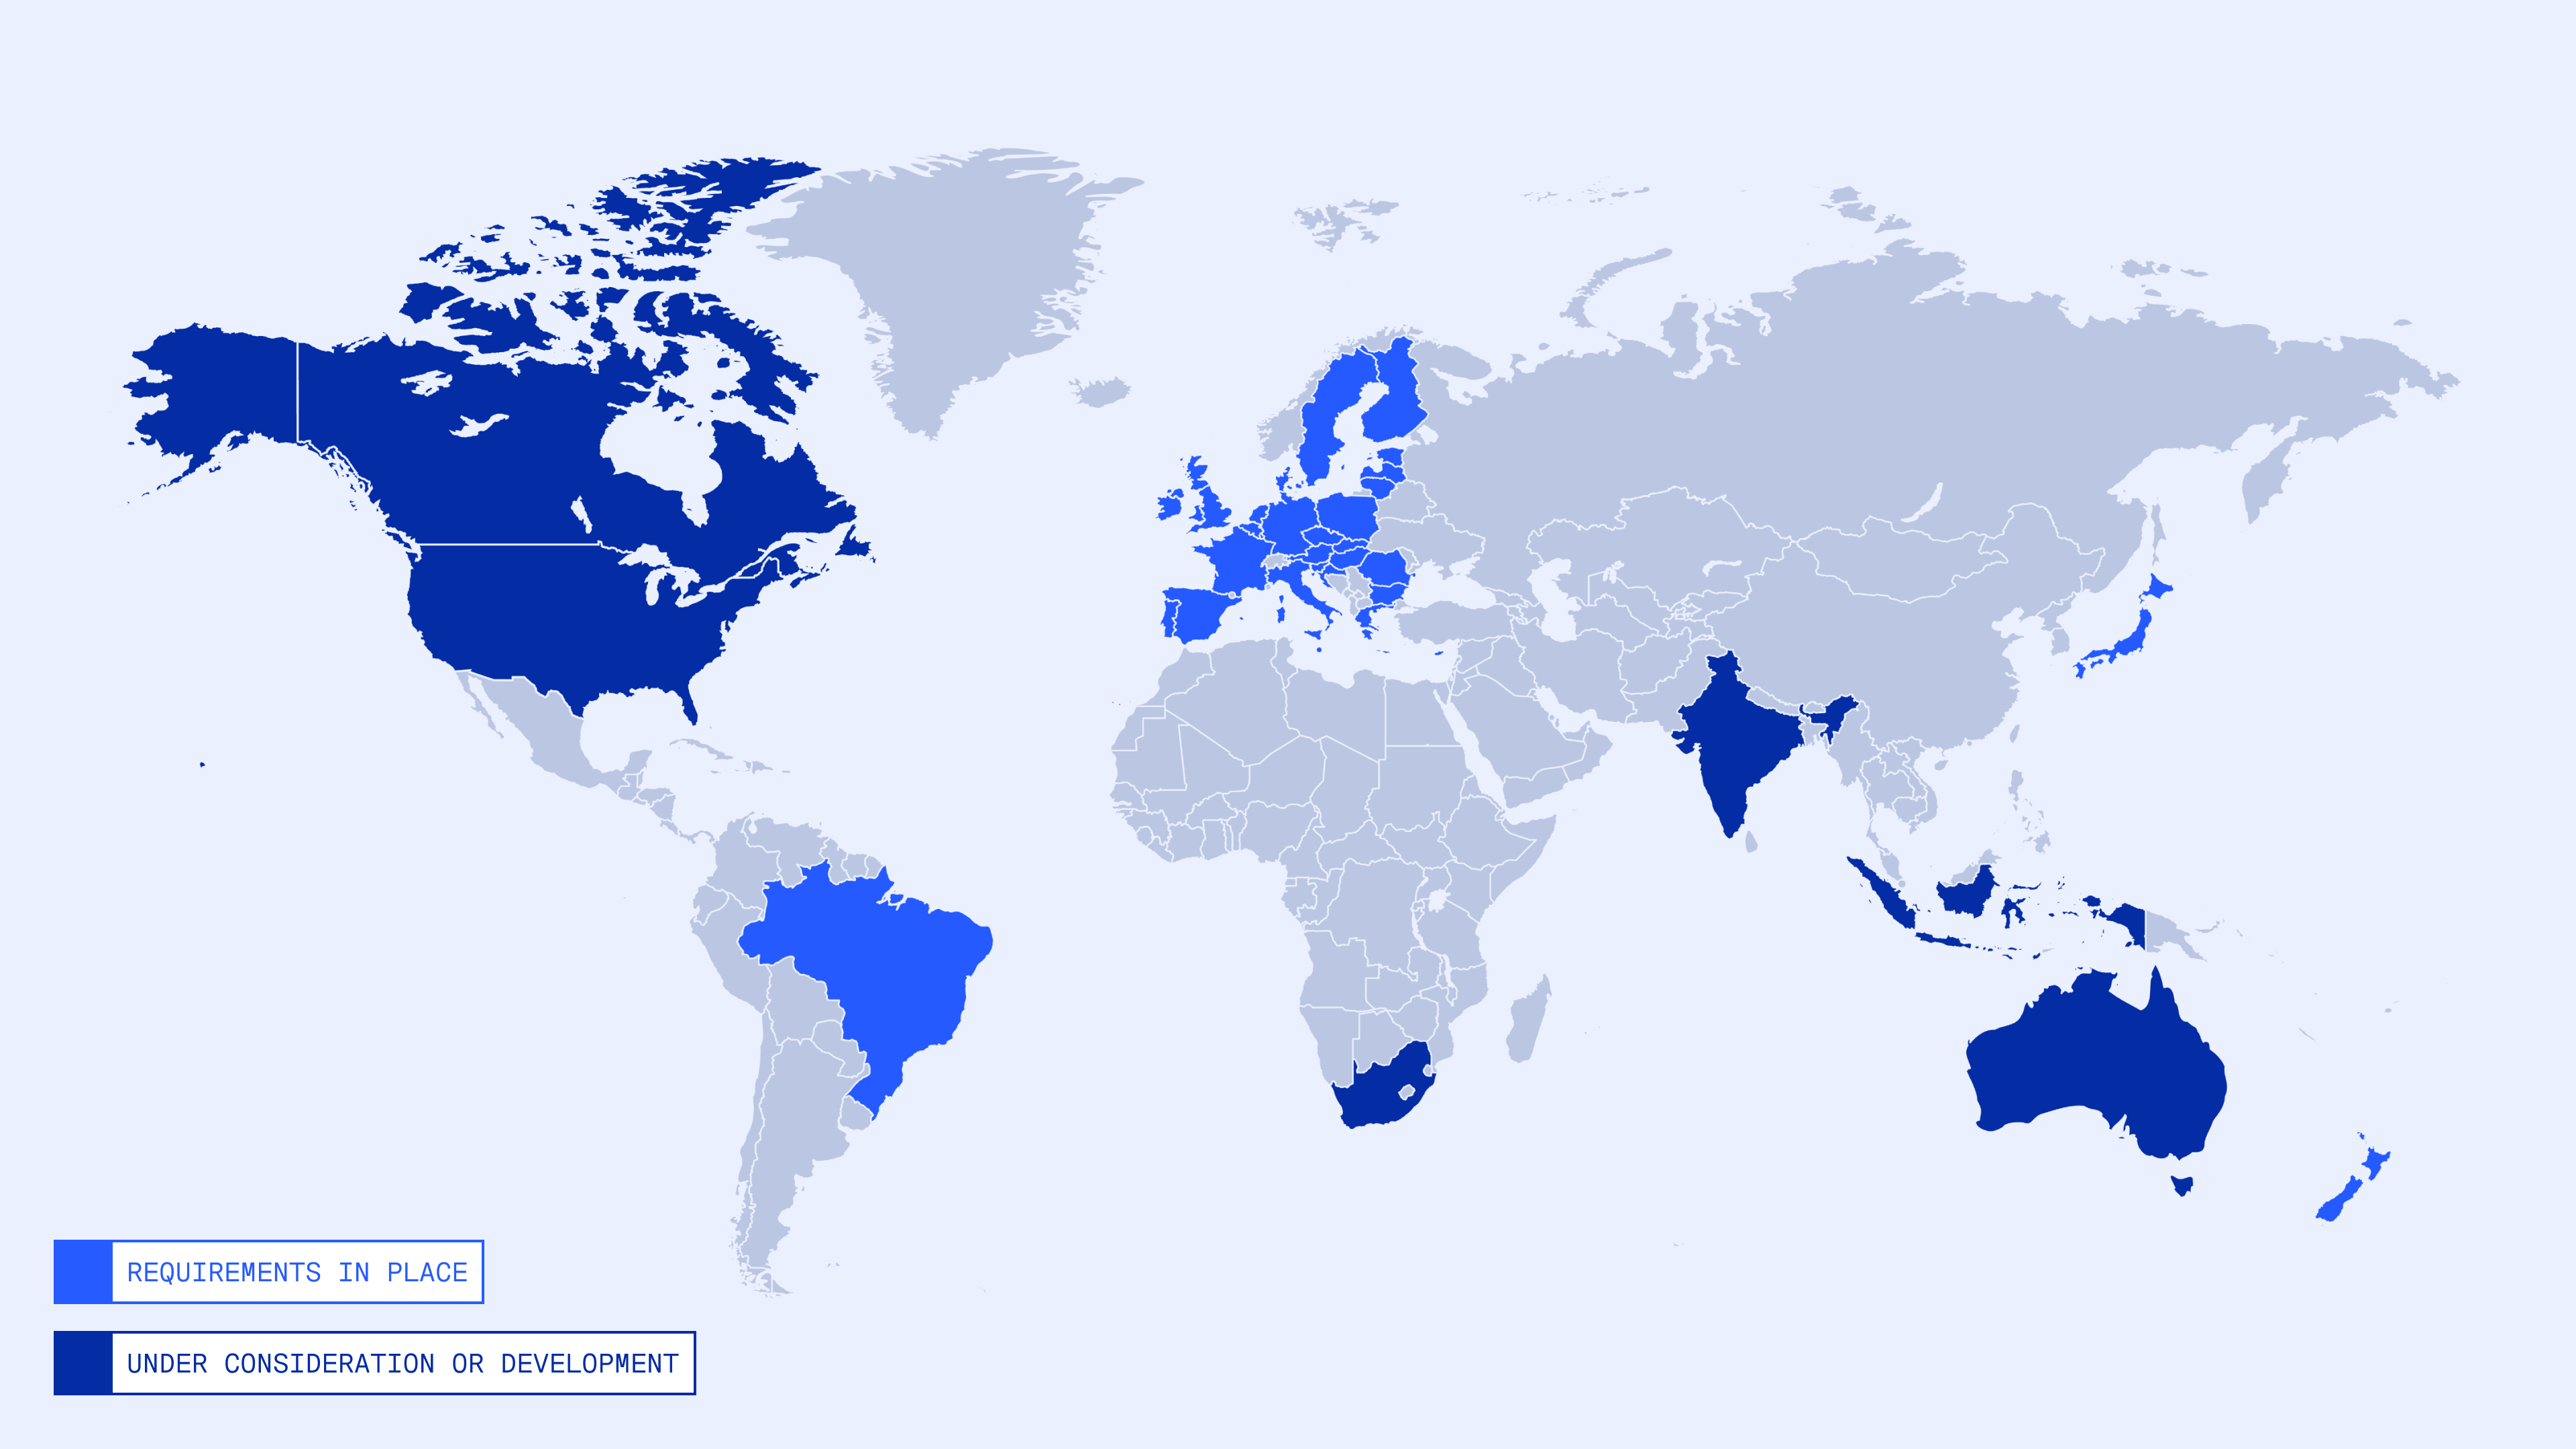 World map showing which countries have requirements in place and which are under consideration or development